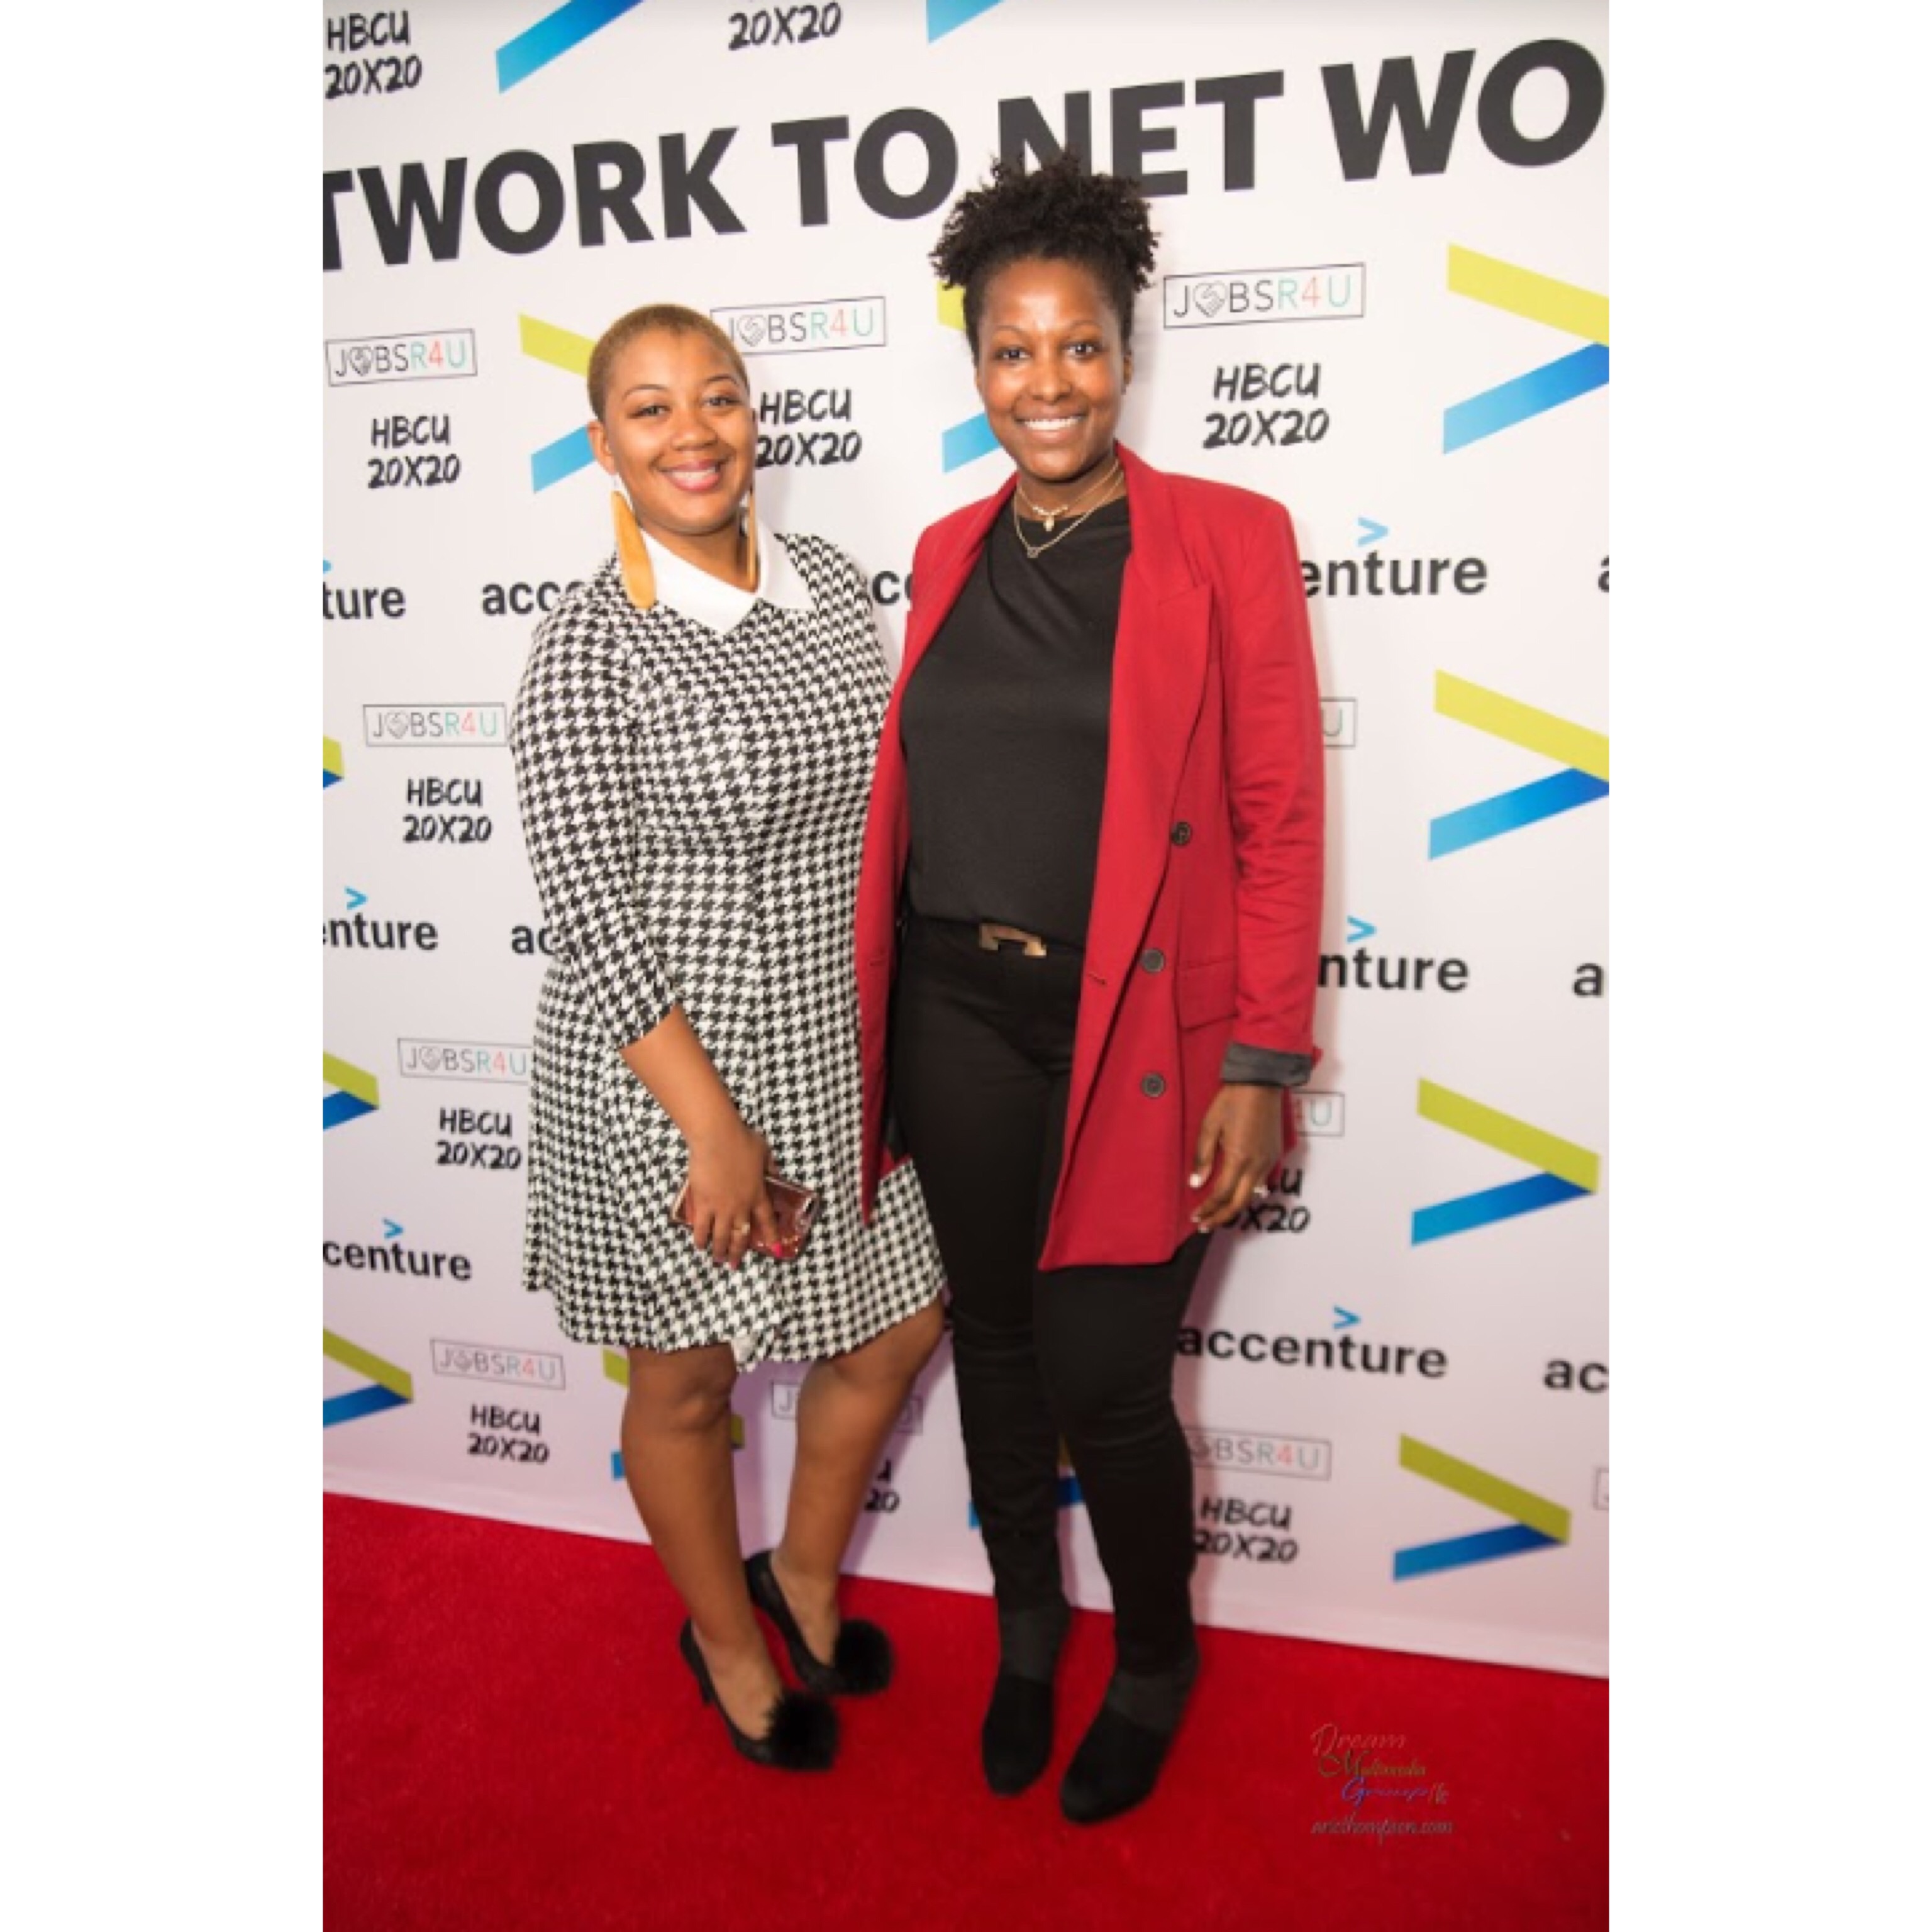 Accenture and HBCU 20x20 To Host Network To NetWorth Event Series